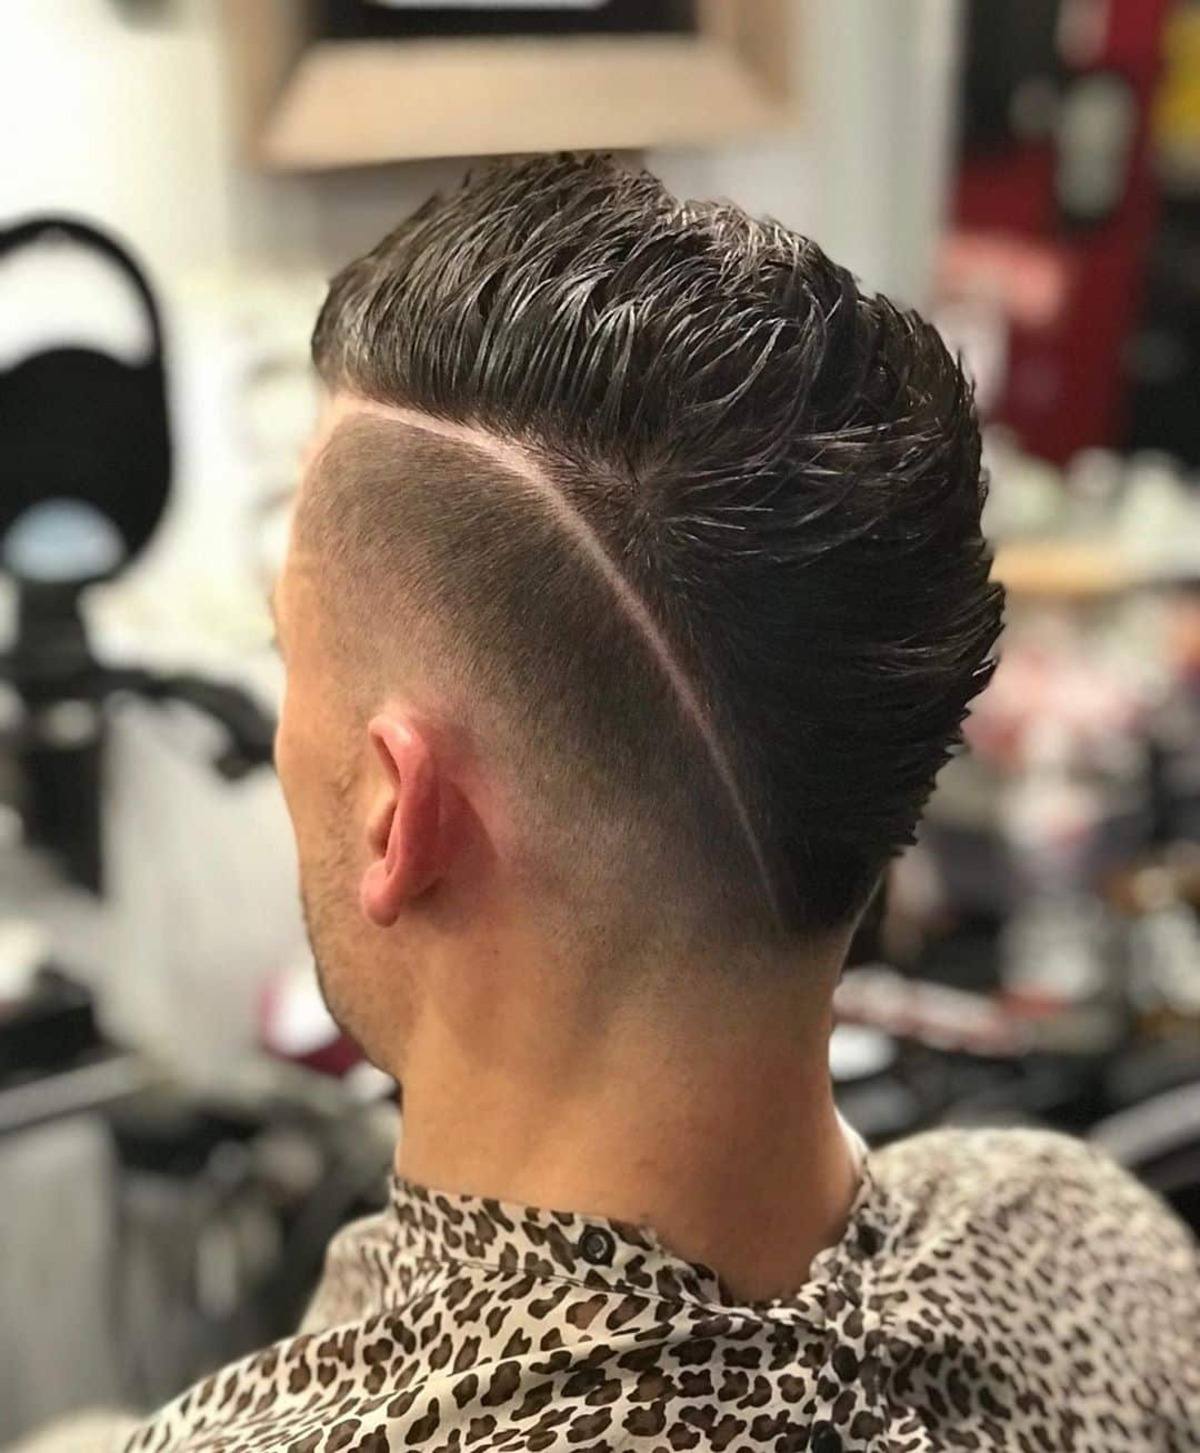 22 Best Mohawk Fade Haircuts for an Edgy, Yet Modern Look